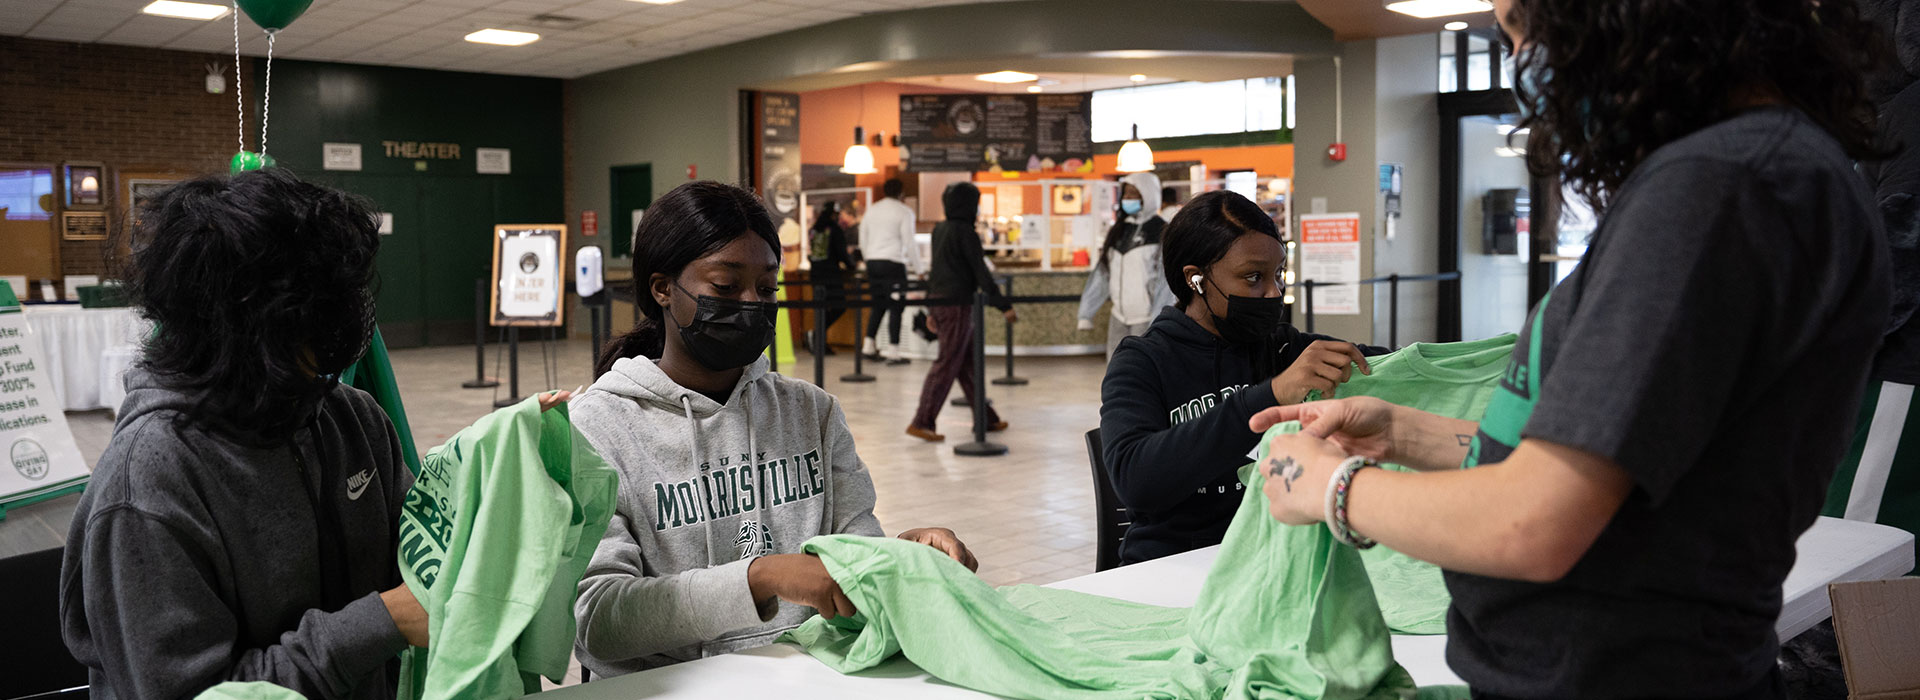 Students upcycle t-shirts to make Morrisville-themed bags.